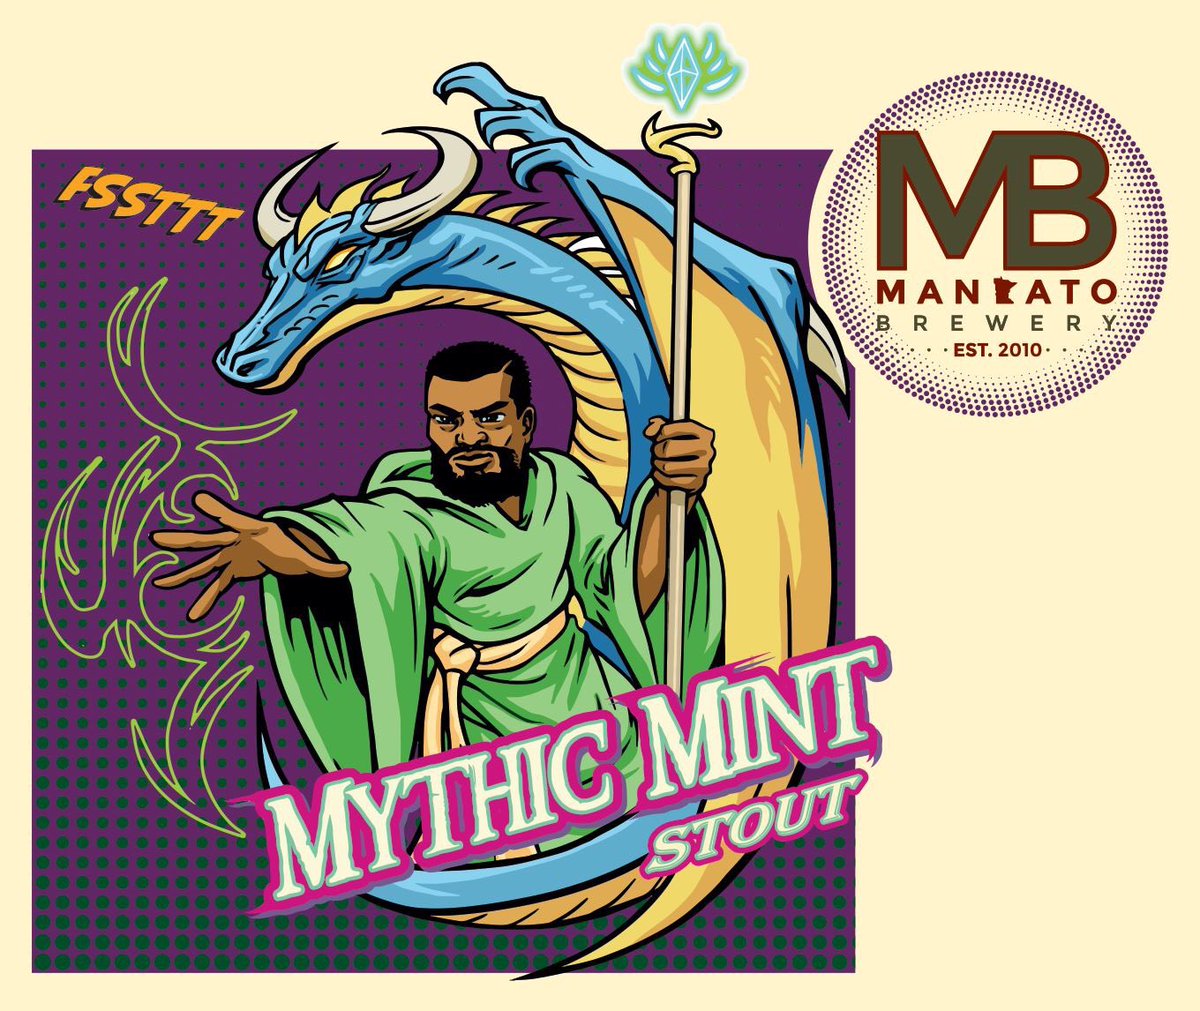 Mythic Mint Stout releasing early November! 5.6% ABV & 38 IBU @mncraftbrew #mnbeer